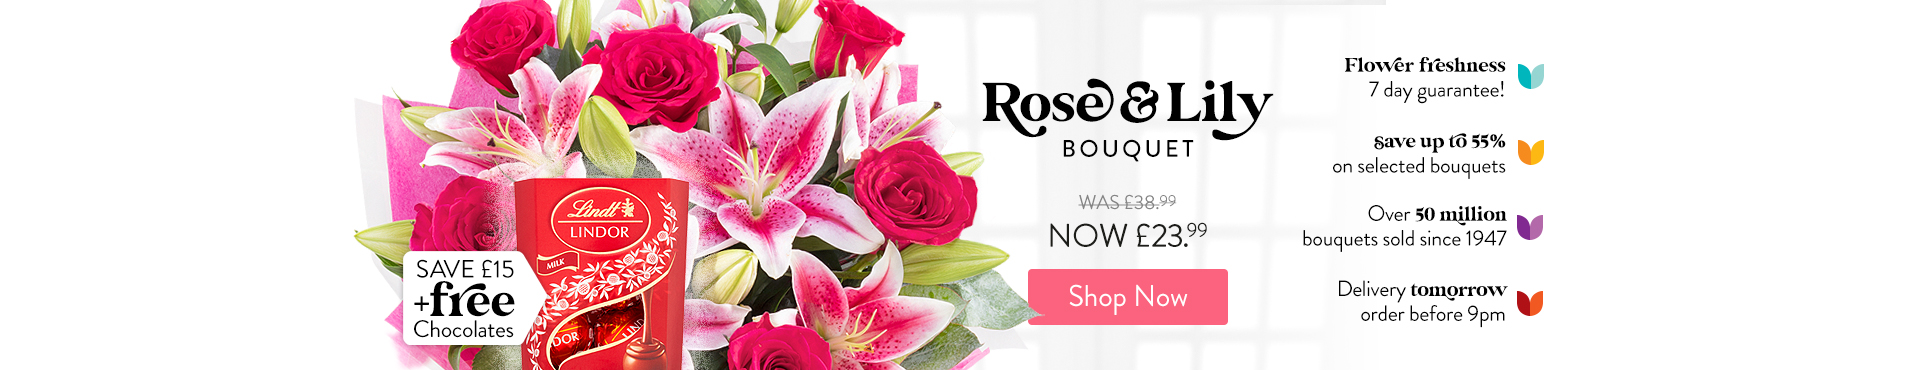 Rose & Lily bouquet Save £15 and free chocolates